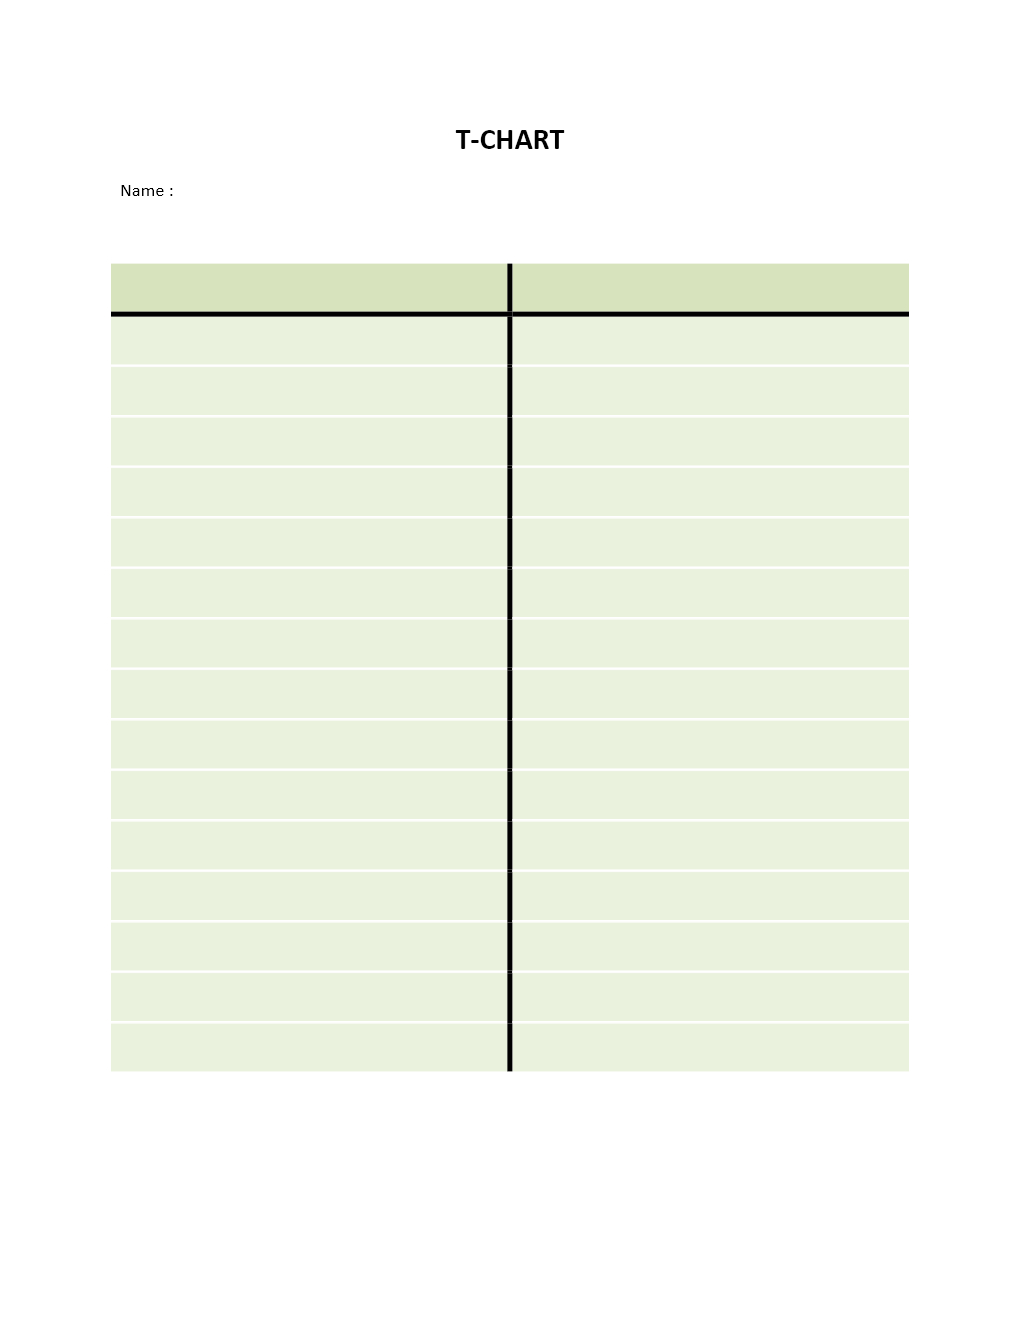 T Chart Template Archives  Freewordtemplates regarding T Chart Template For Word